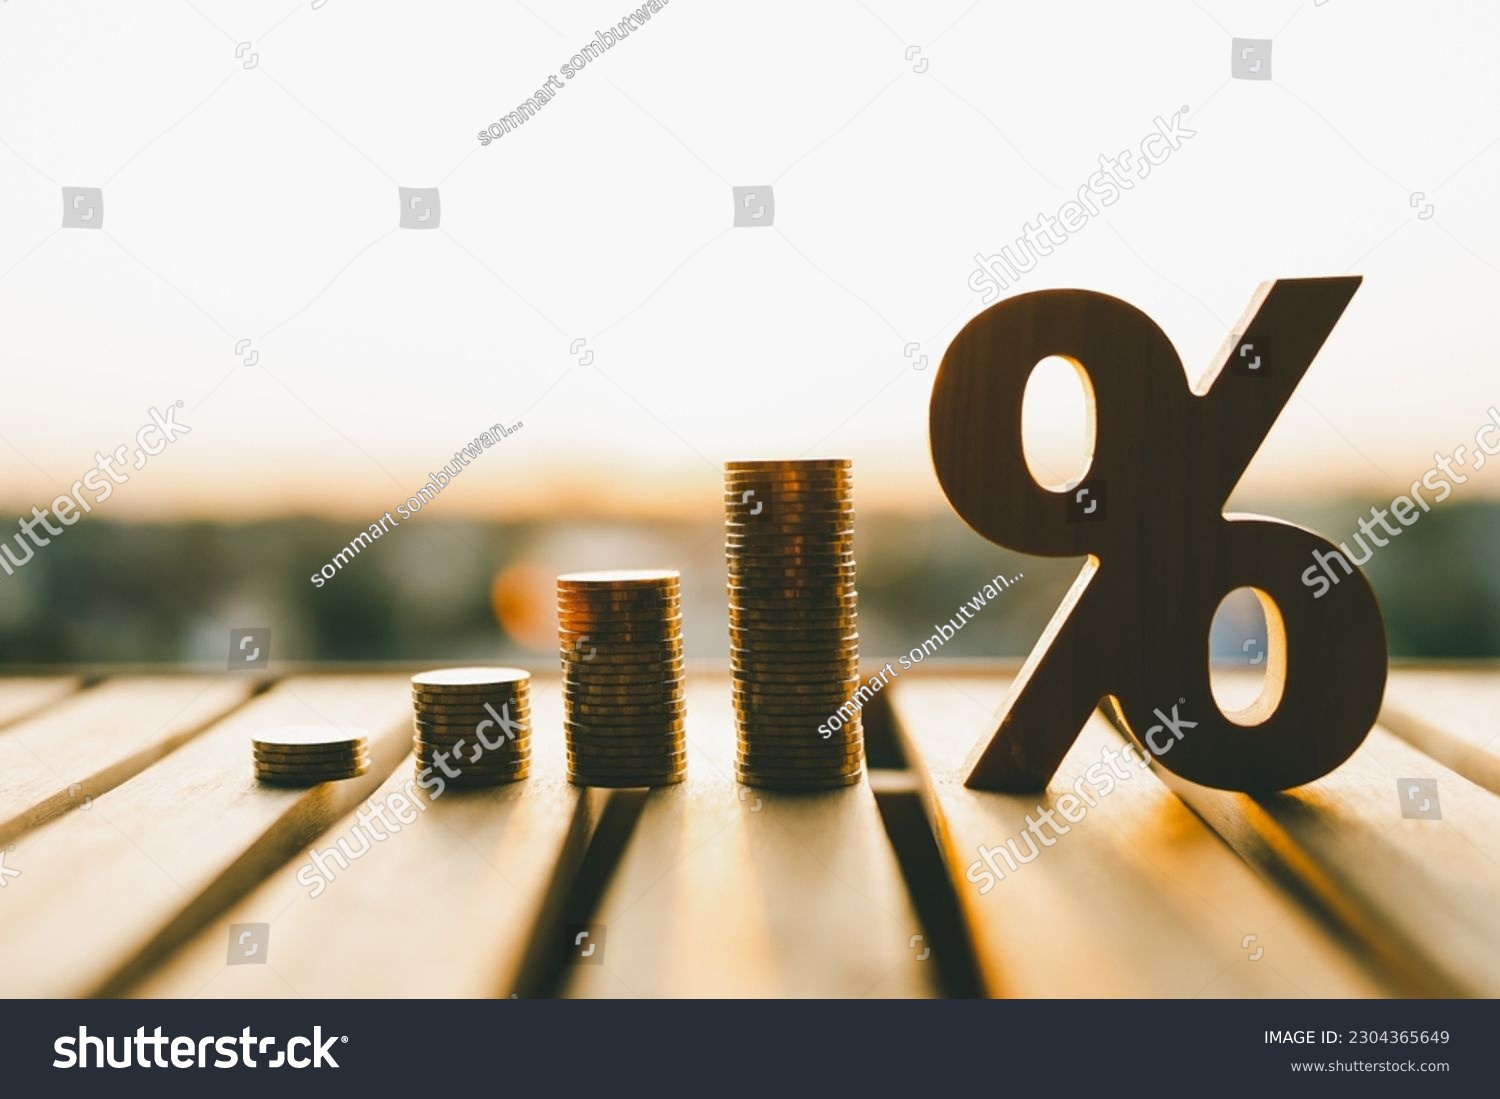 Percentage model with coins stack. Concepts of the banking system, rising interest rates, inflation, deflation, and savings.	 #2304365649